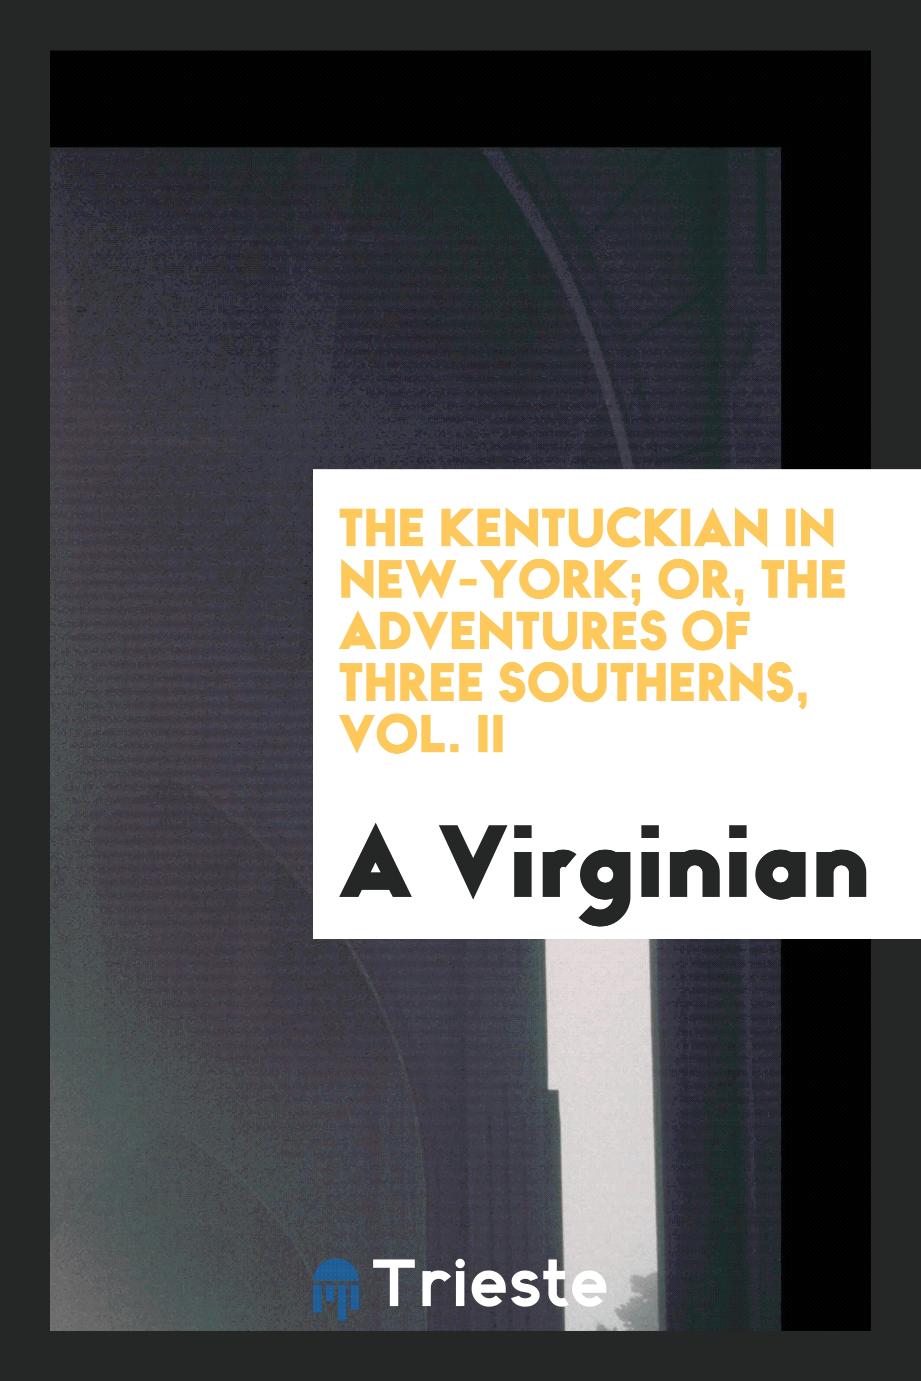 The Kentuckian in New-York; or, the adventures of three southerns, Vol. II